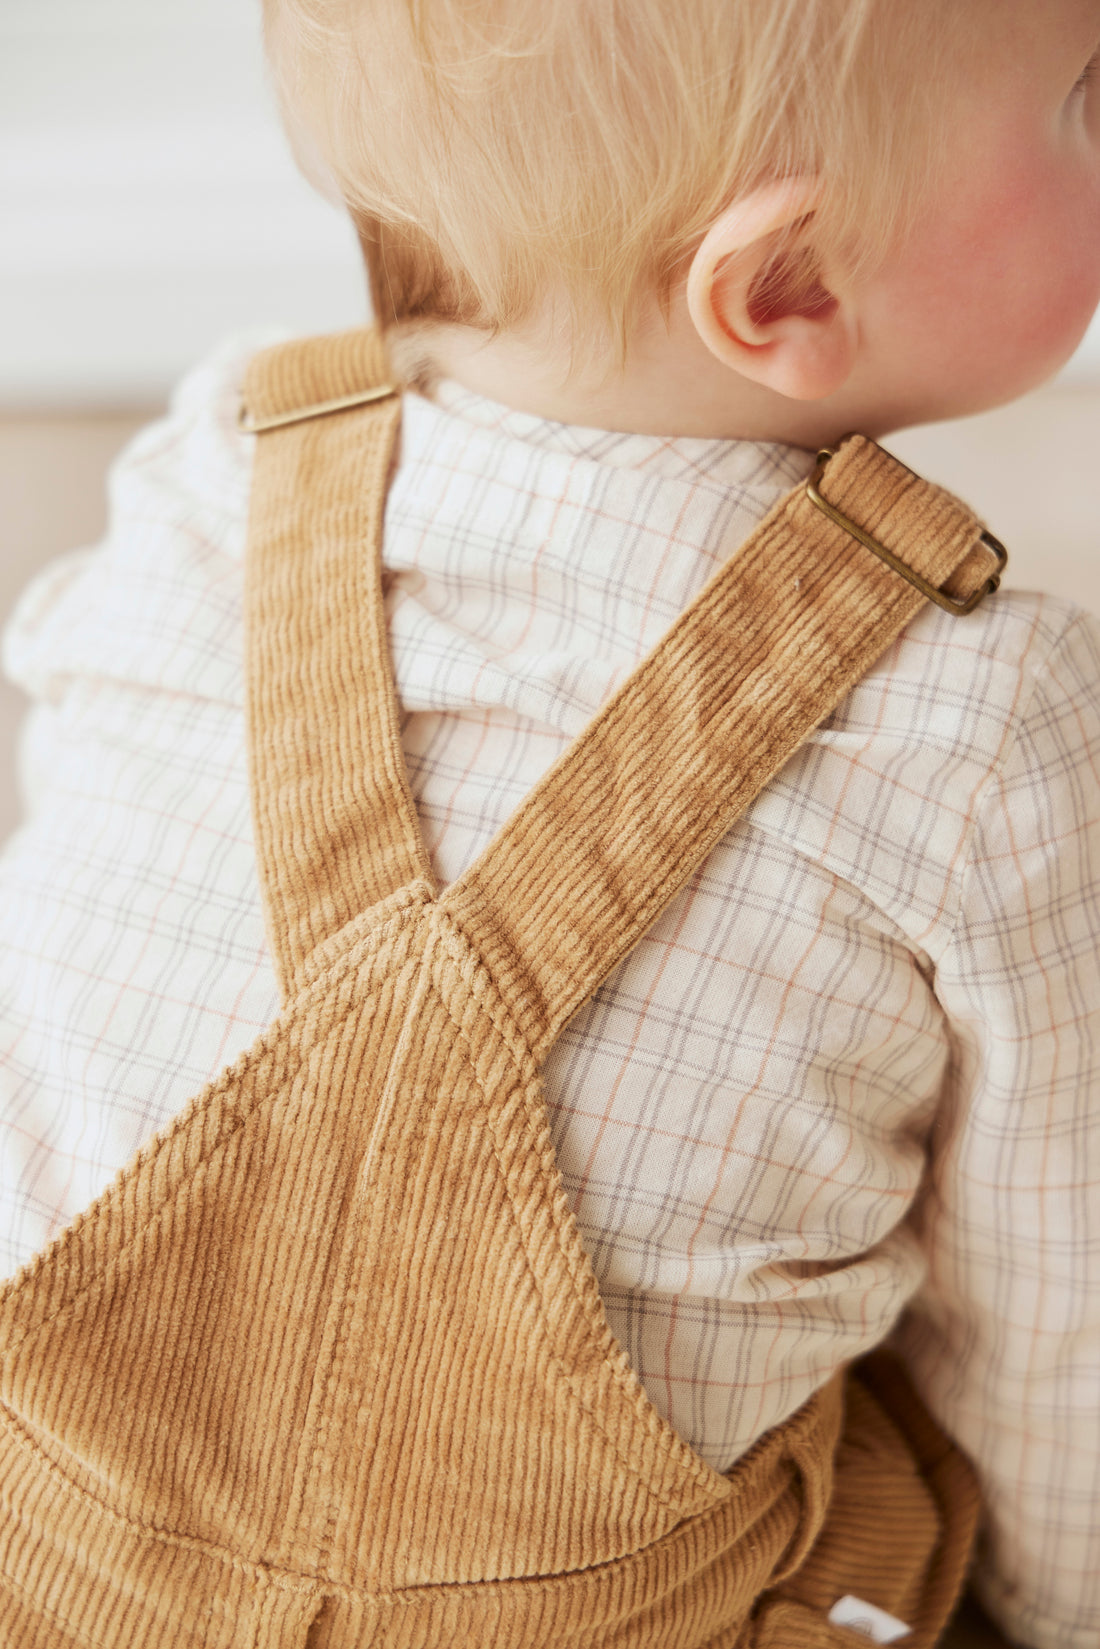 Jordie Cord Overall - Bronzed Childrens Overall from Jamie Kay NZ